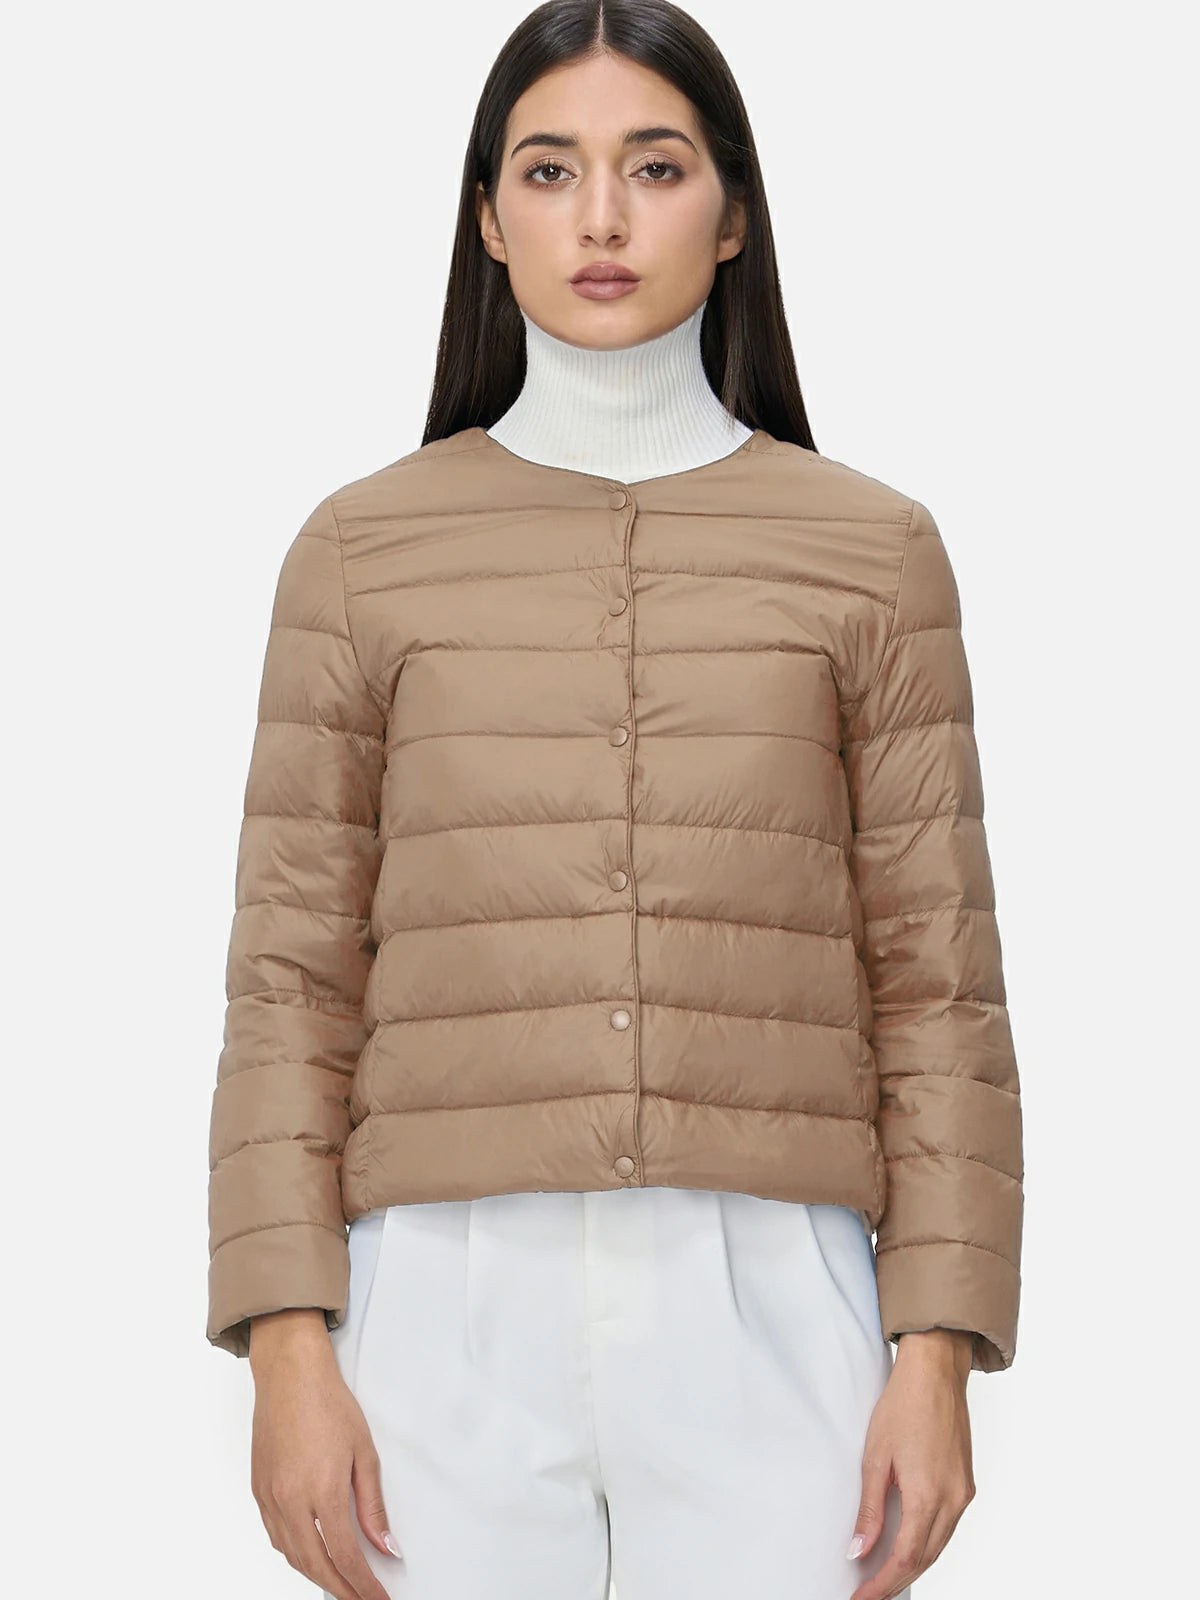 Maintain warmth in an fashionable down jacket